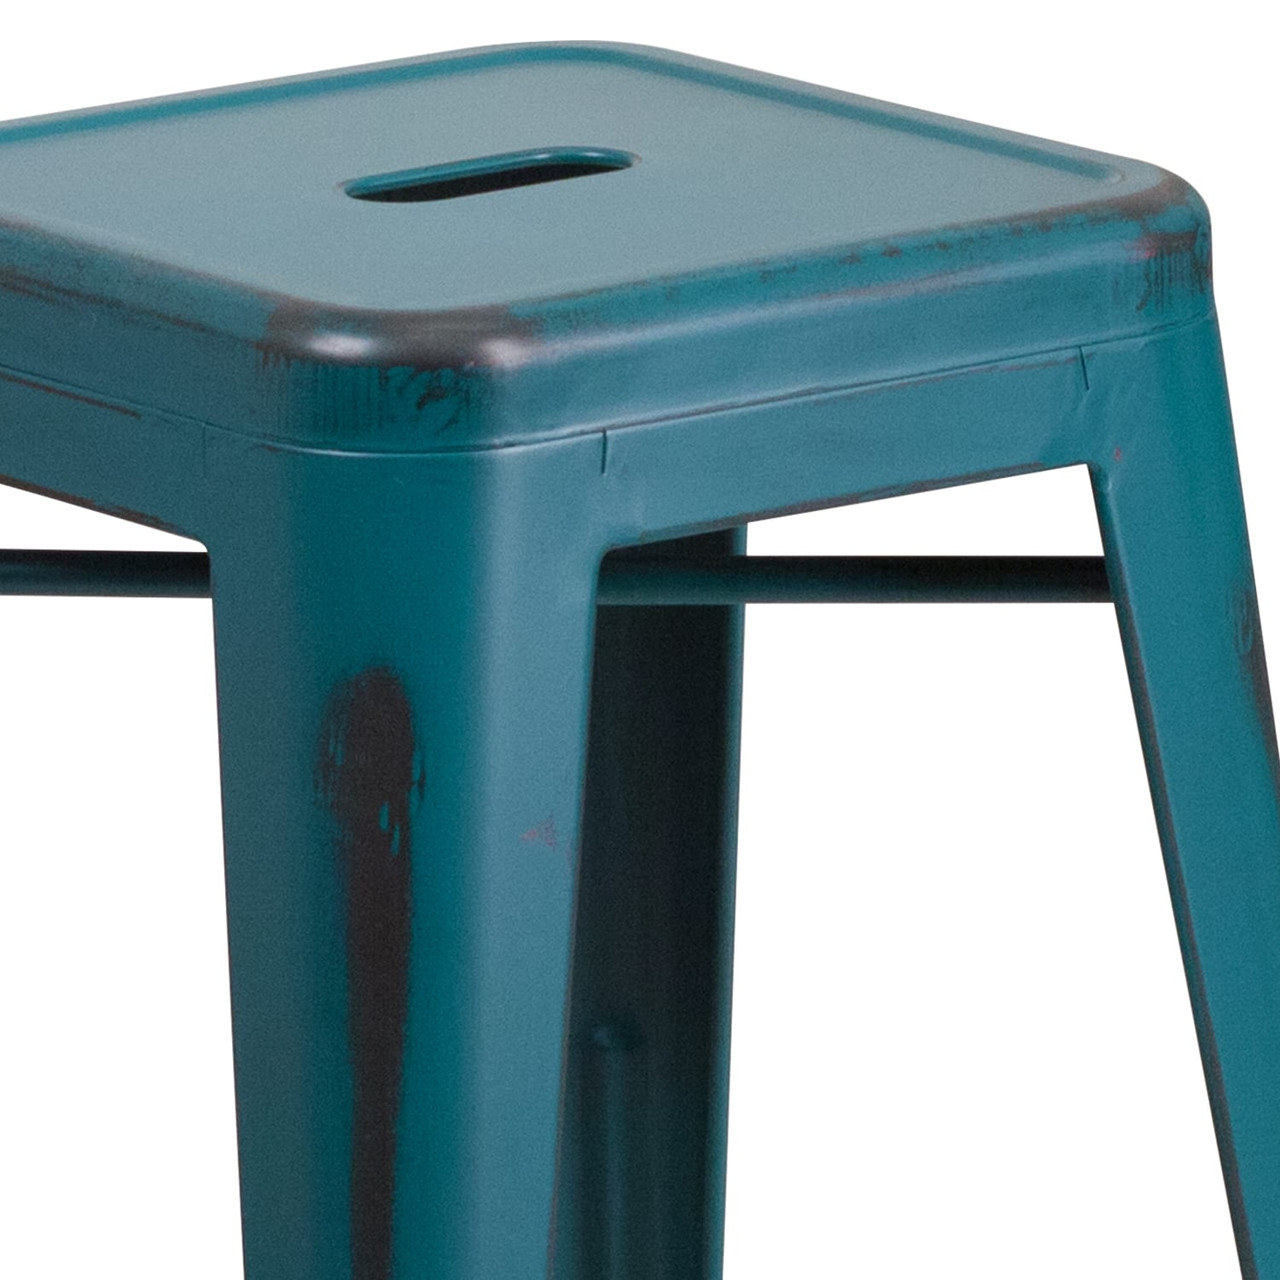 24” High Backless Distressed Kelly Blue-Teal Metal Indoor-Outdoor Counter Height Stool